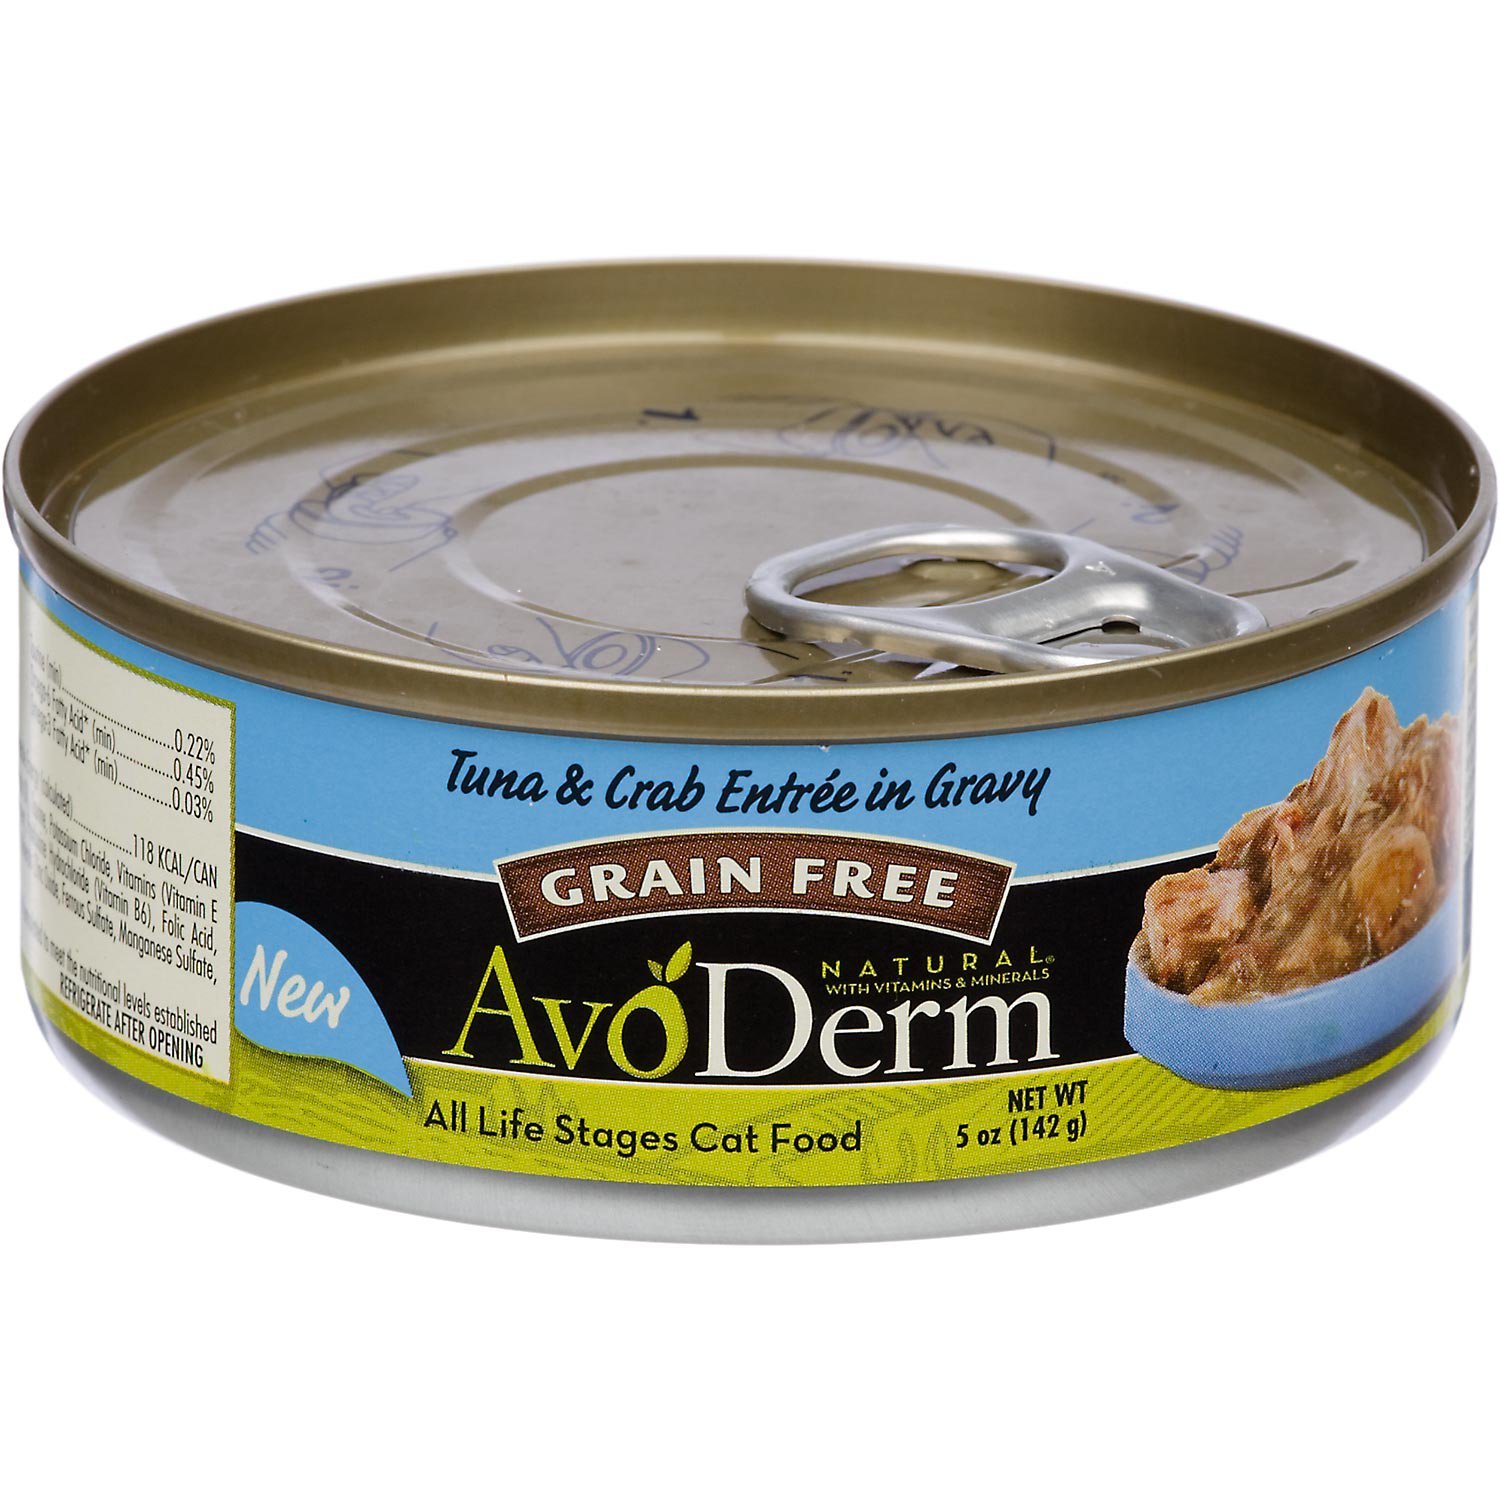 AvoDerm Natural Grain Free Tuna & Crab Entree in Gravy Canned Wet Cat Food